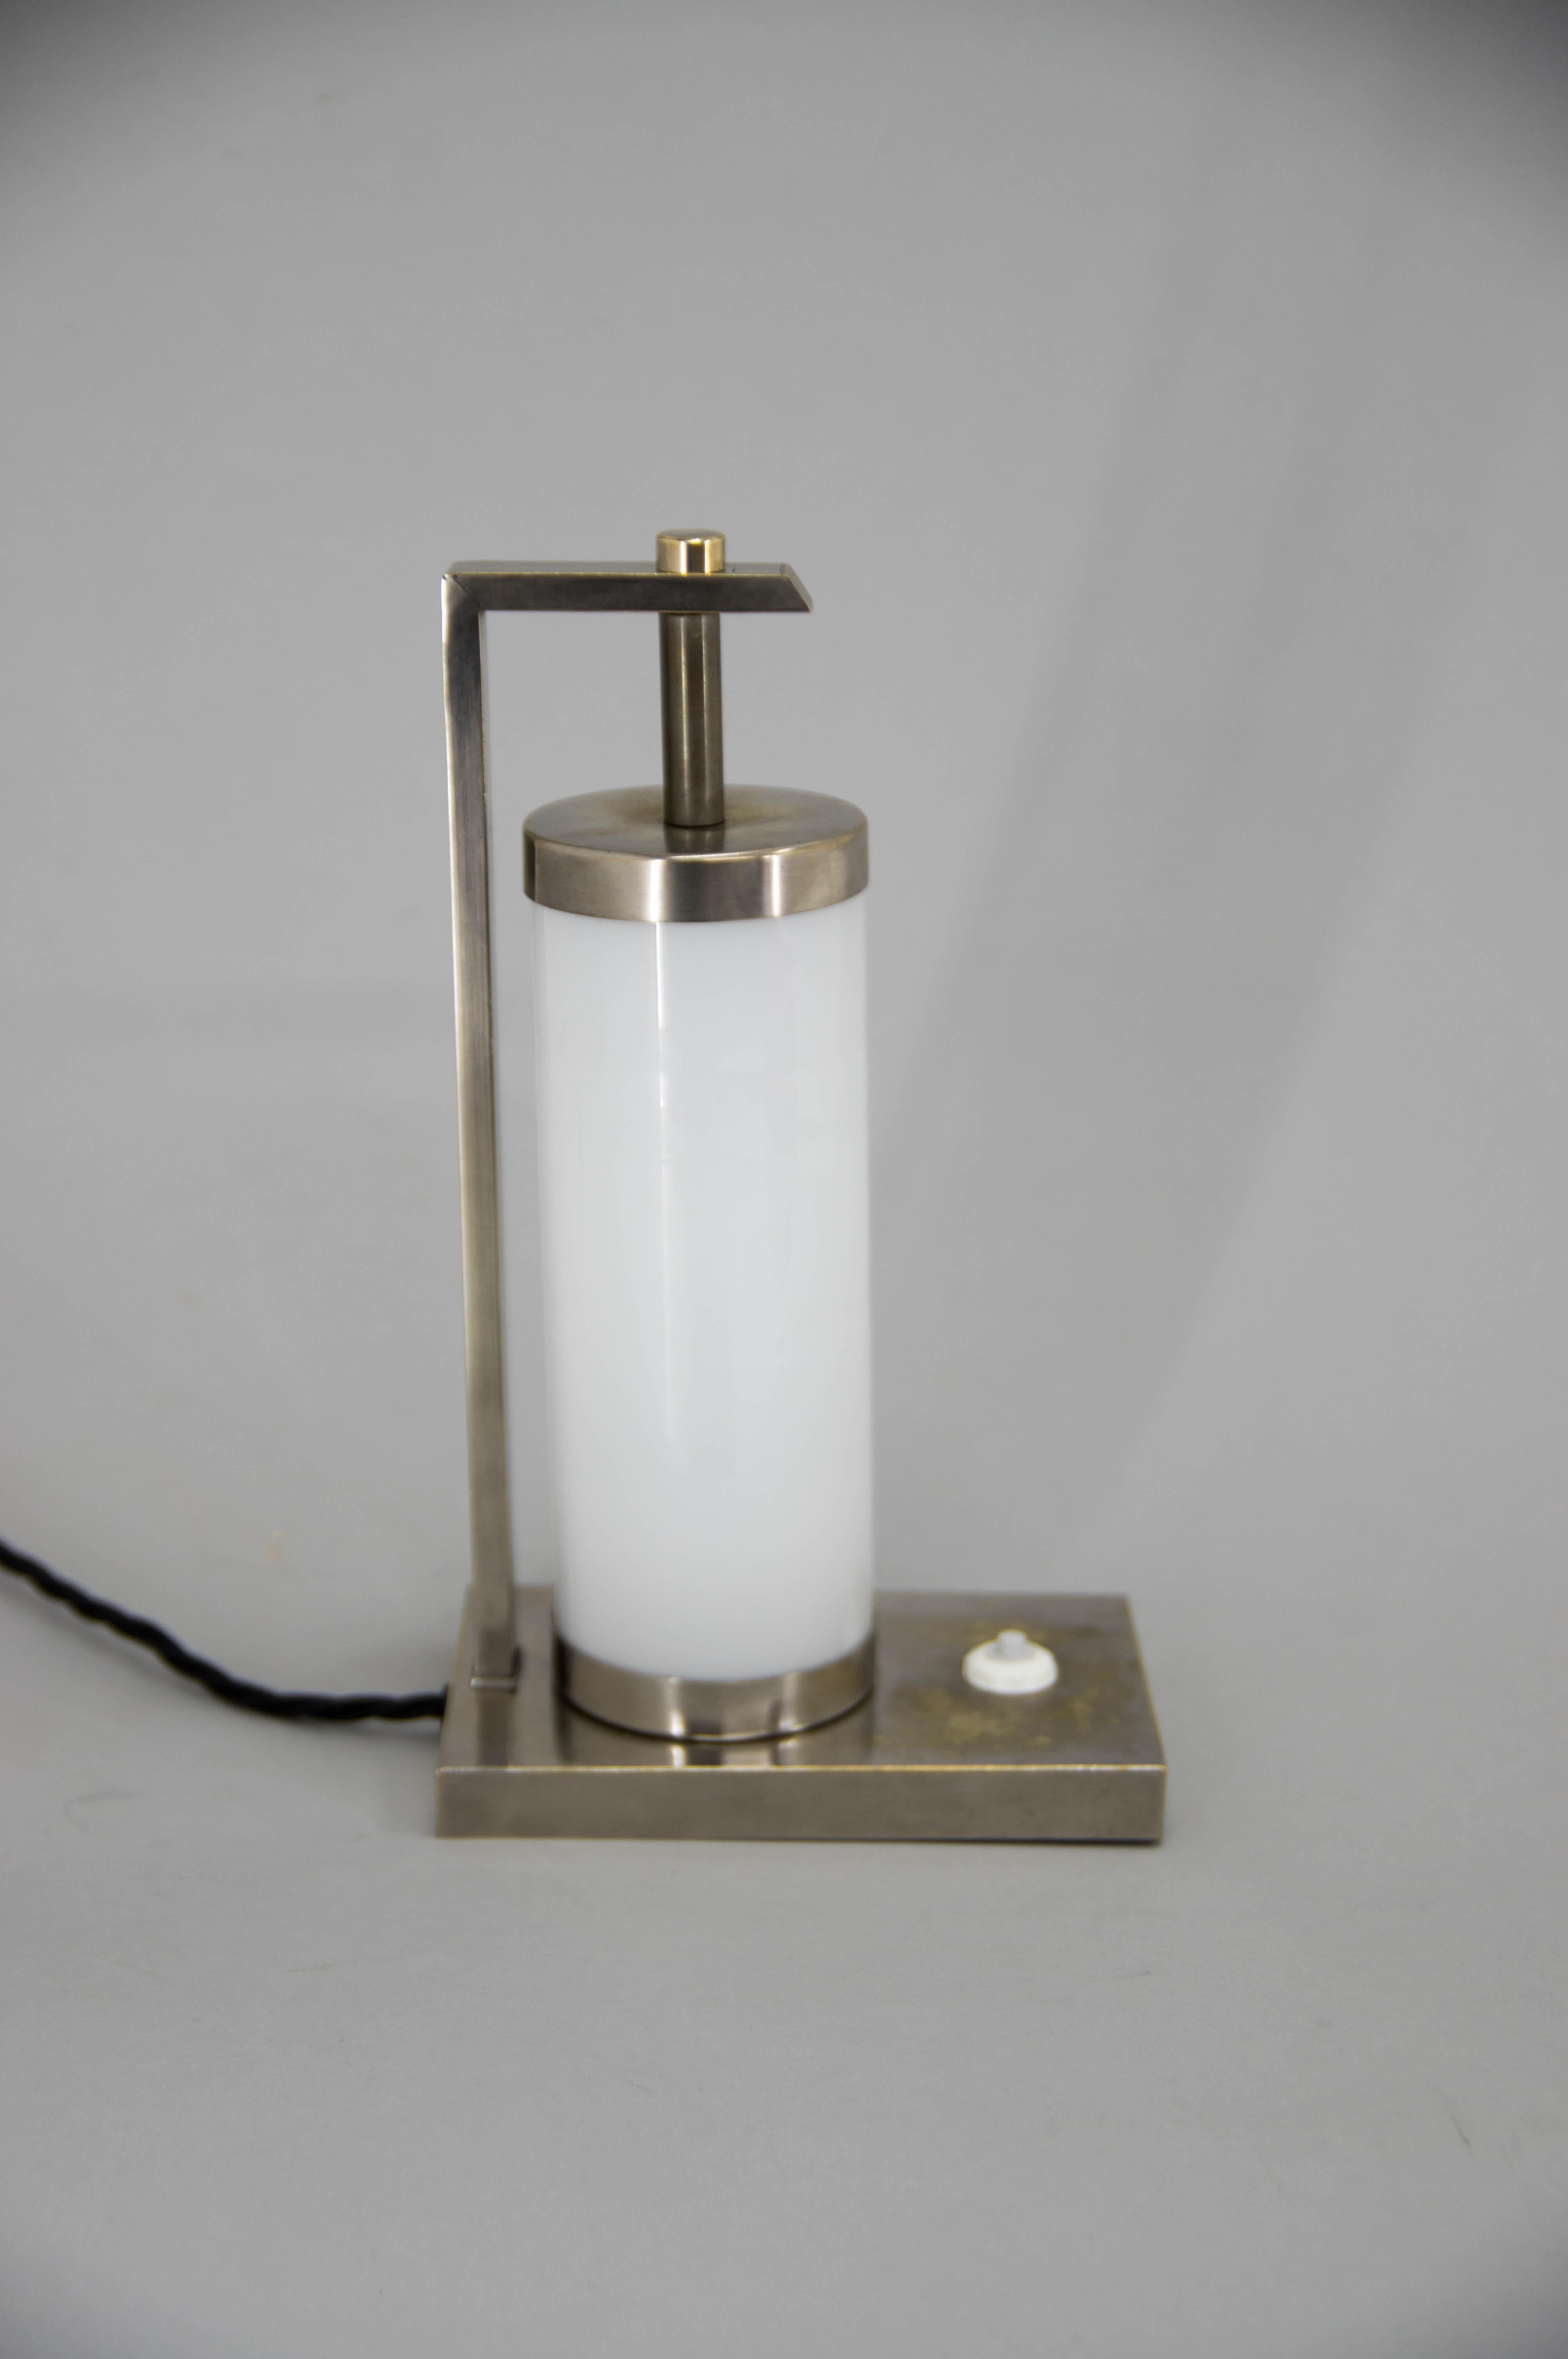 Opaline Glass Bauhaus / Functionalist Table or Bedside Lamp, 1930s